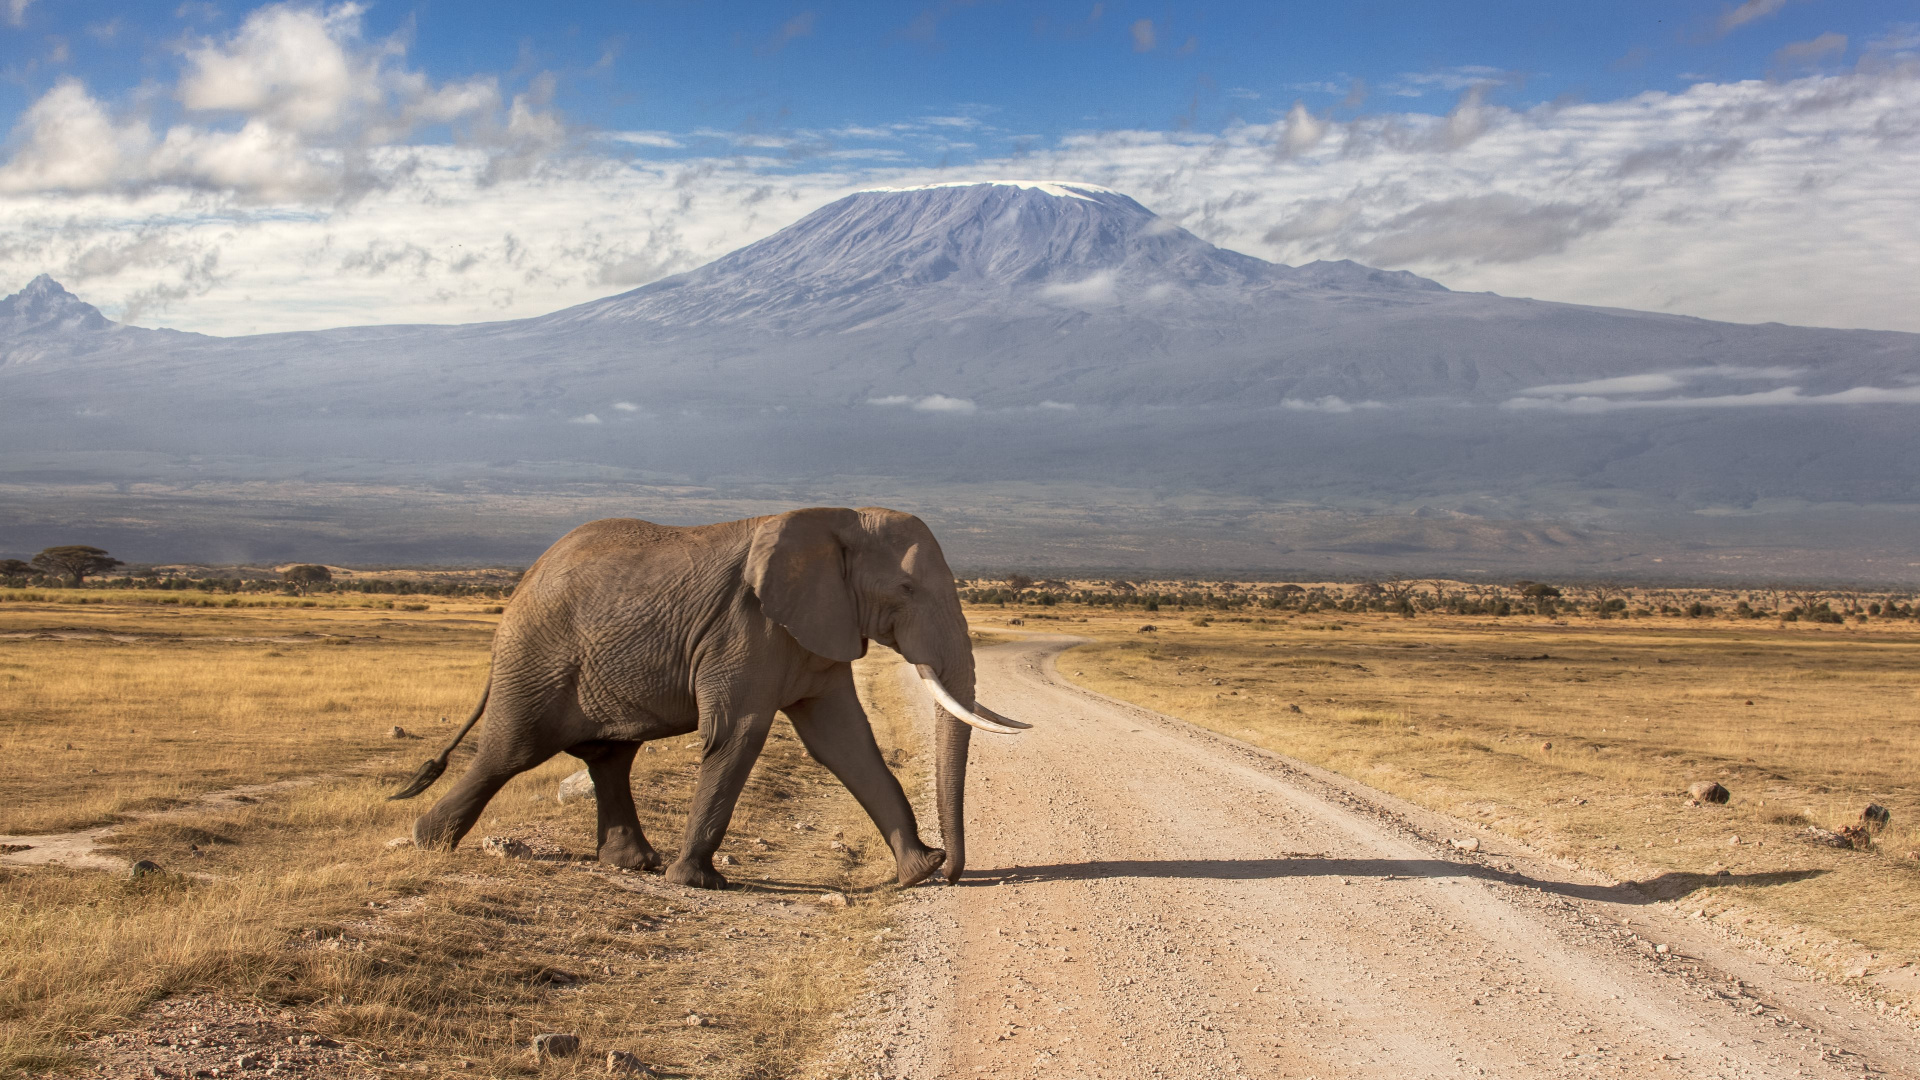 Elephant Walking on Road During Daytime. Wallpaper in 1920x1080 Resolution